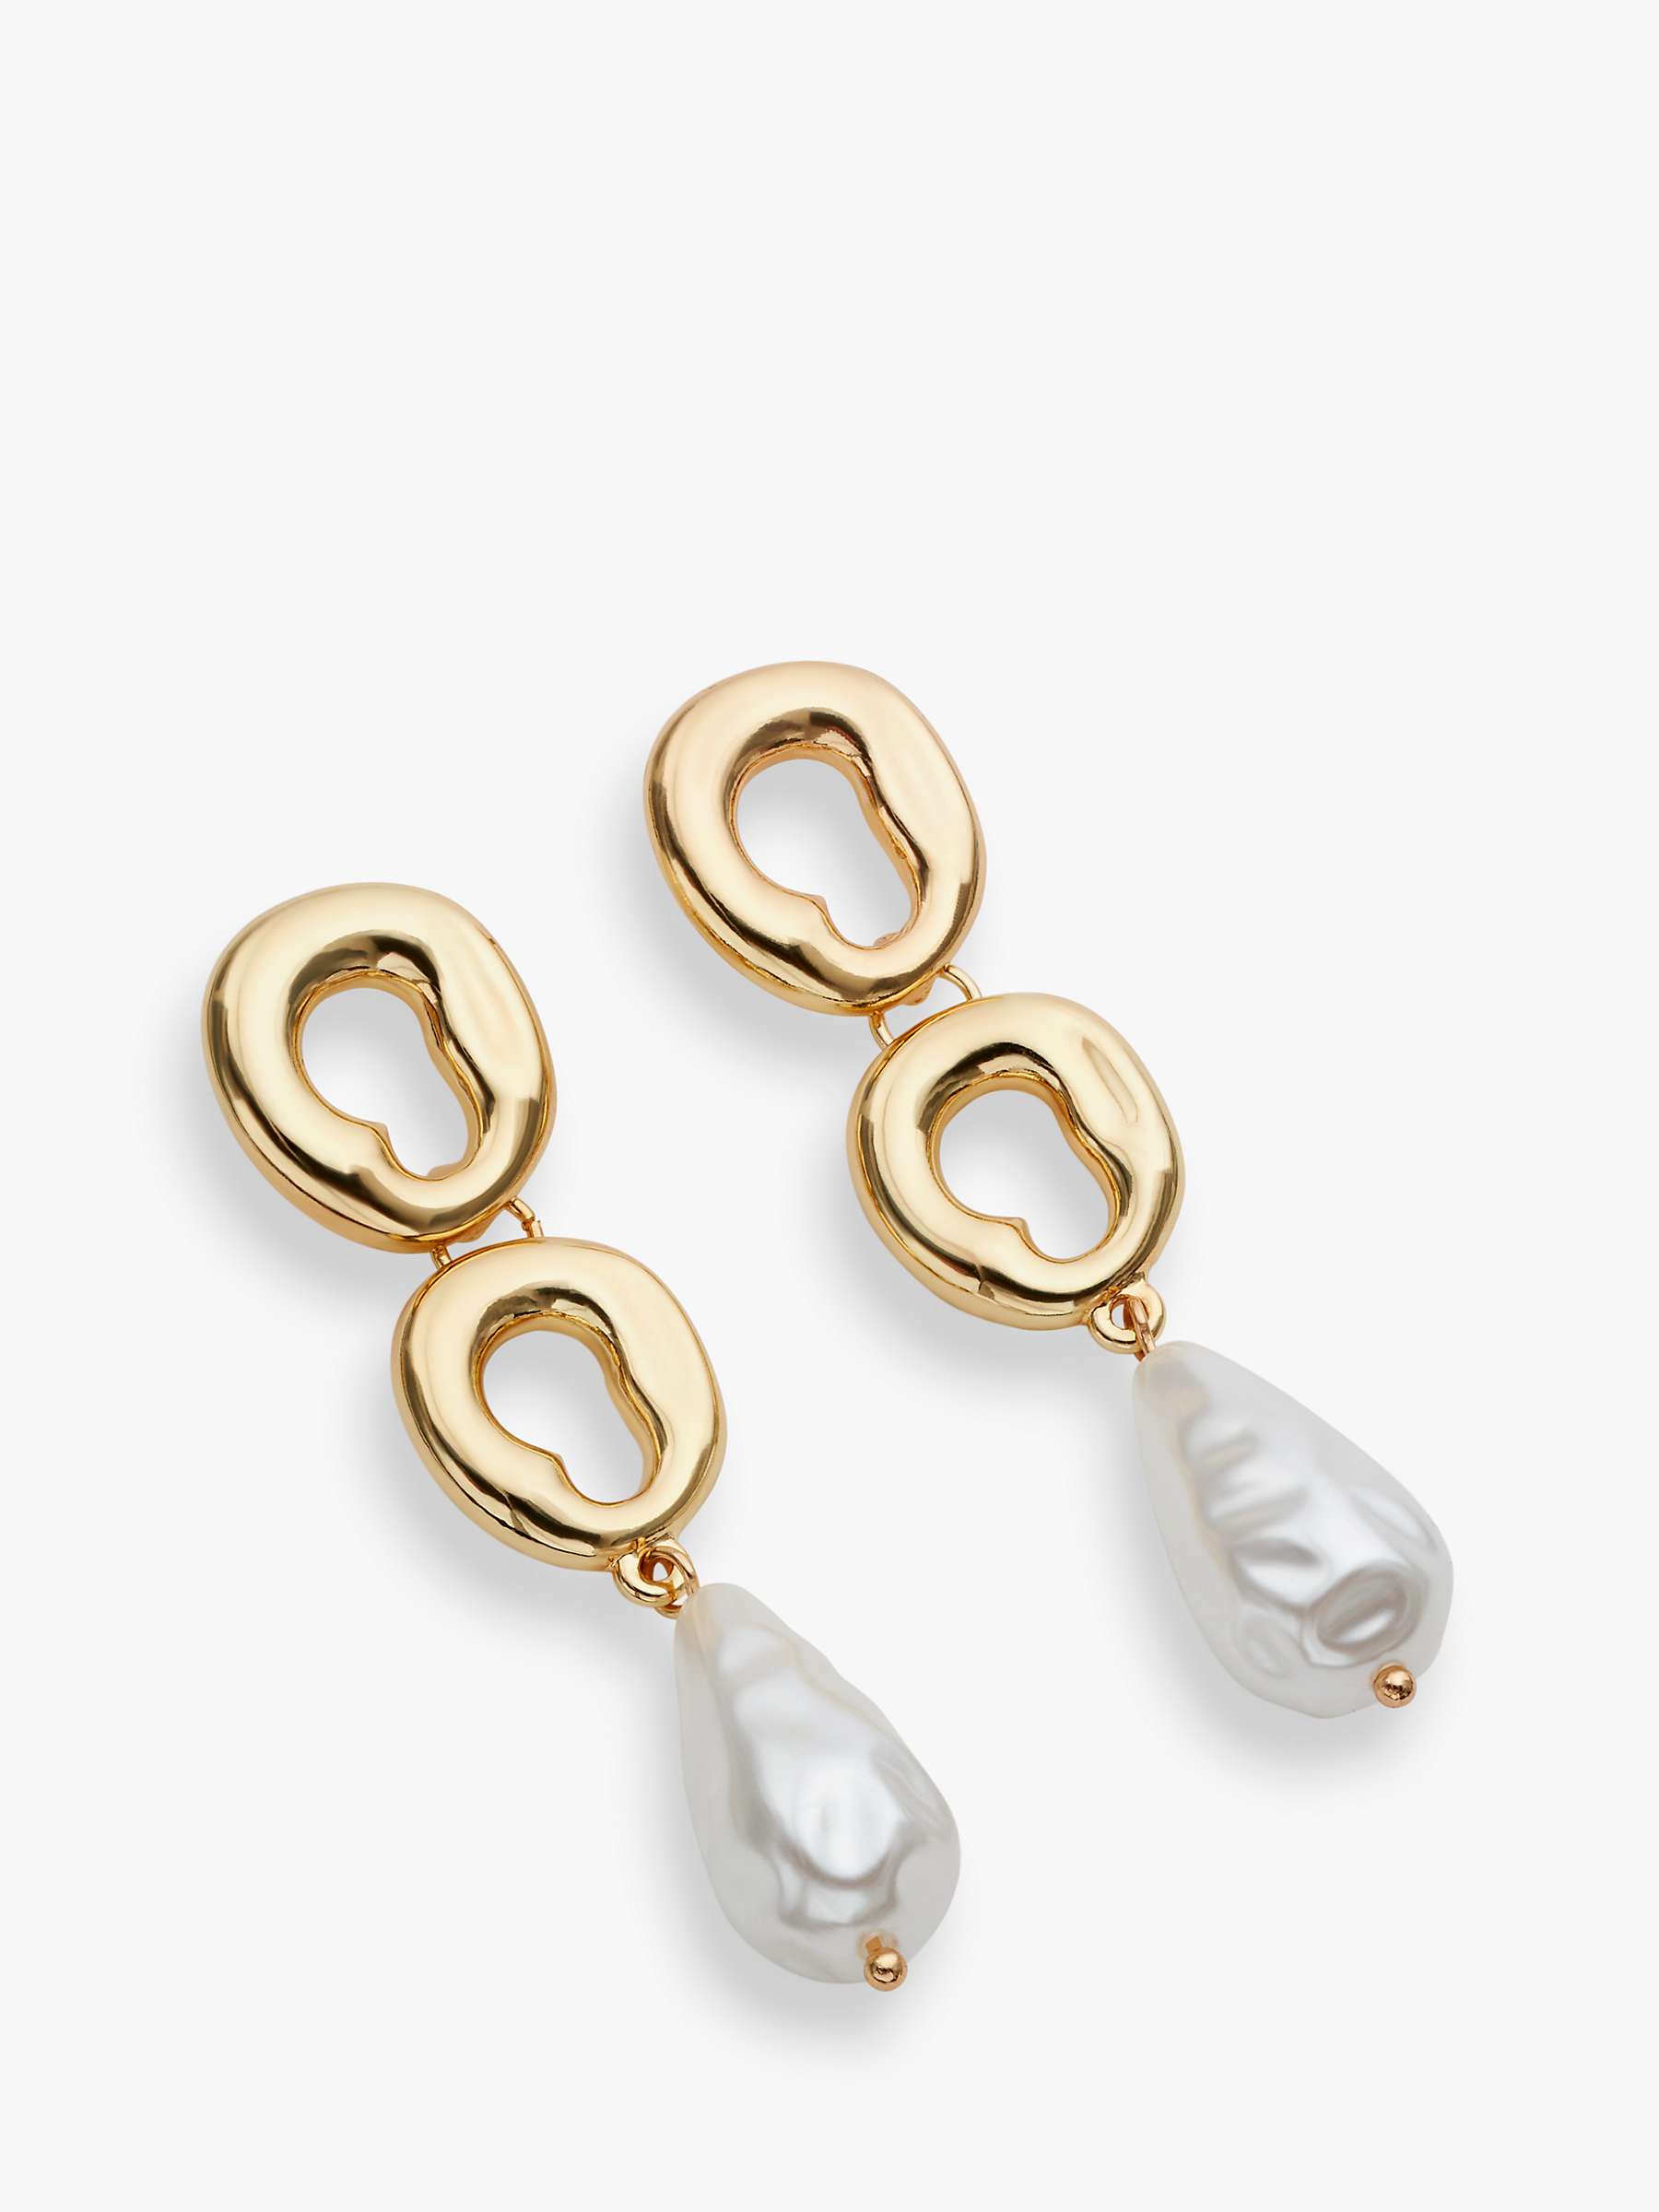 Buy John Lewis Statement Molten Circle and Faux Pearl Drop Earrings, Gold Online at johnlewis.com